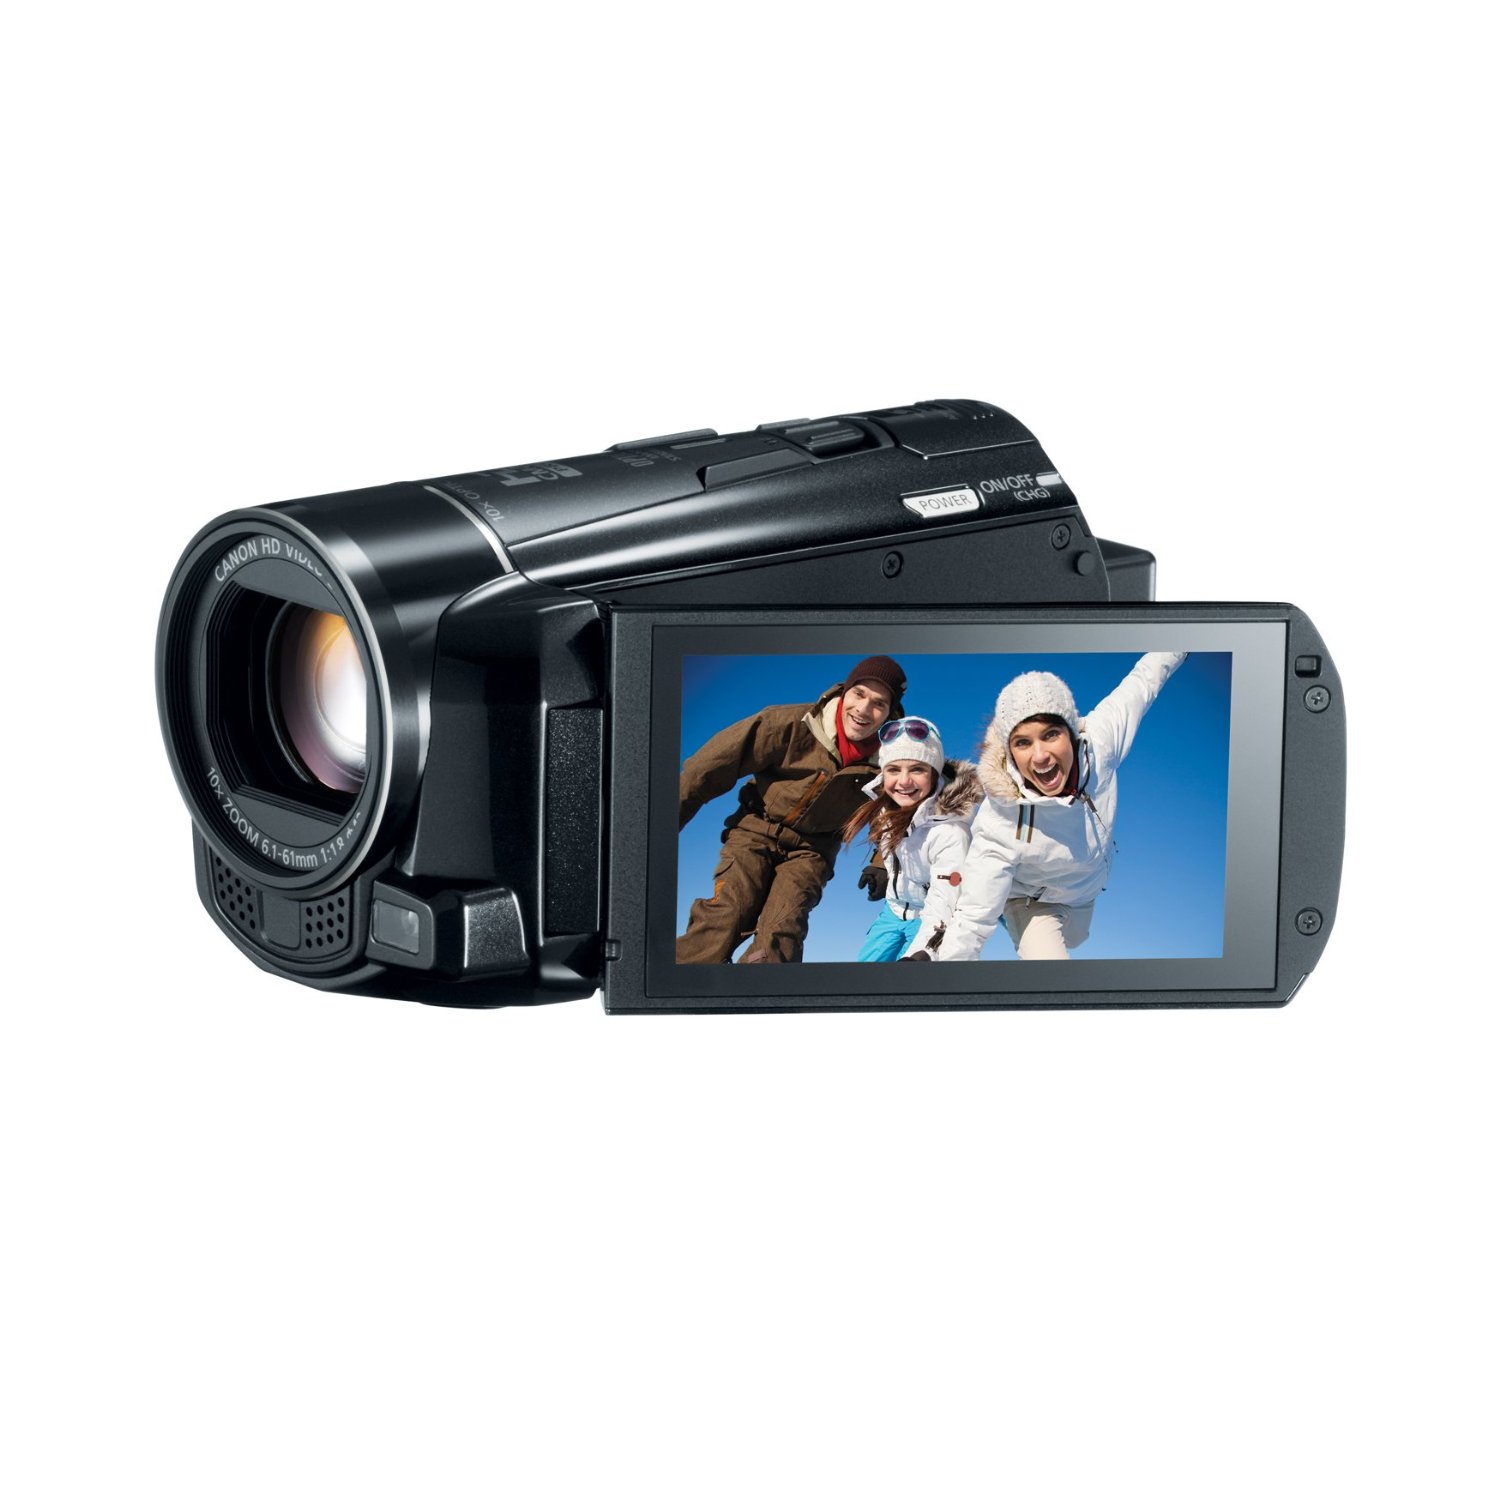 http://thetechjournal.com/wp-content/uploads/images/1204/1334815378-canon-vixia-hf-m52-full-hd-10x-image-stabilize-camcorder-6.jpg